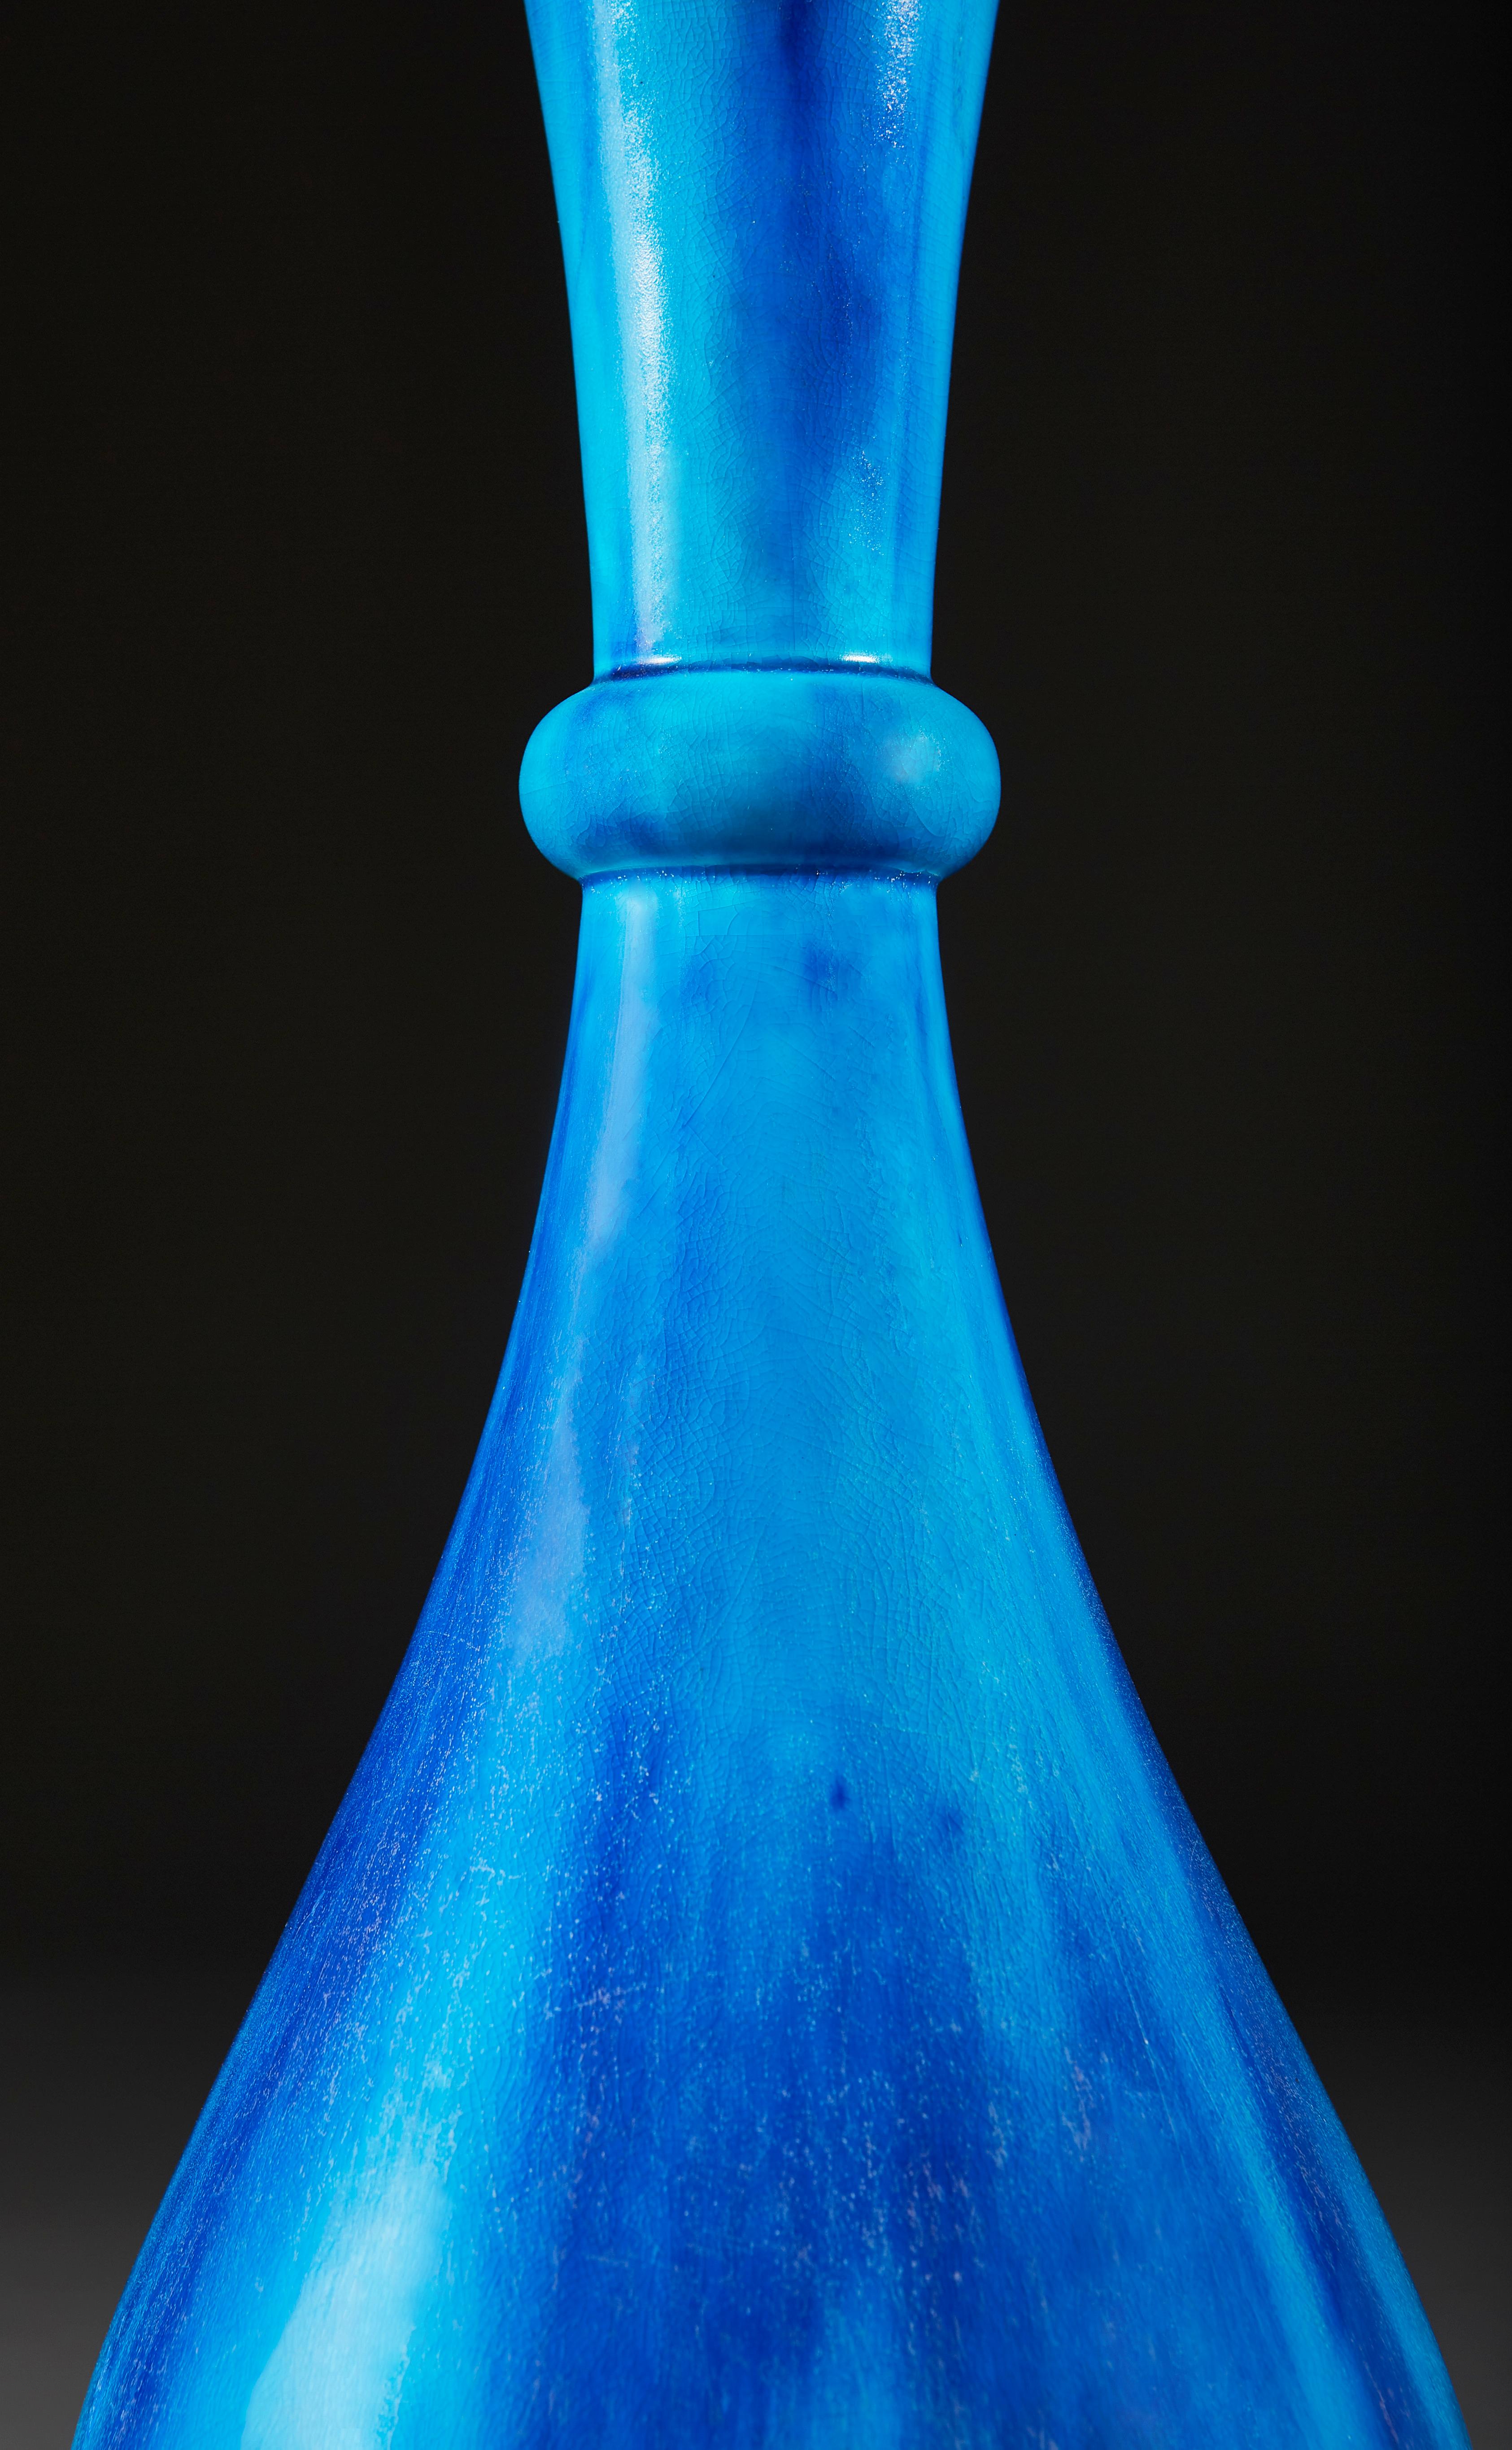 A twentieth century Minton bottle neck vase, with wonderful variegated blue glaze, now converted as a lamp.

Please note: Lampshade not included.

Currently wired for the UK.